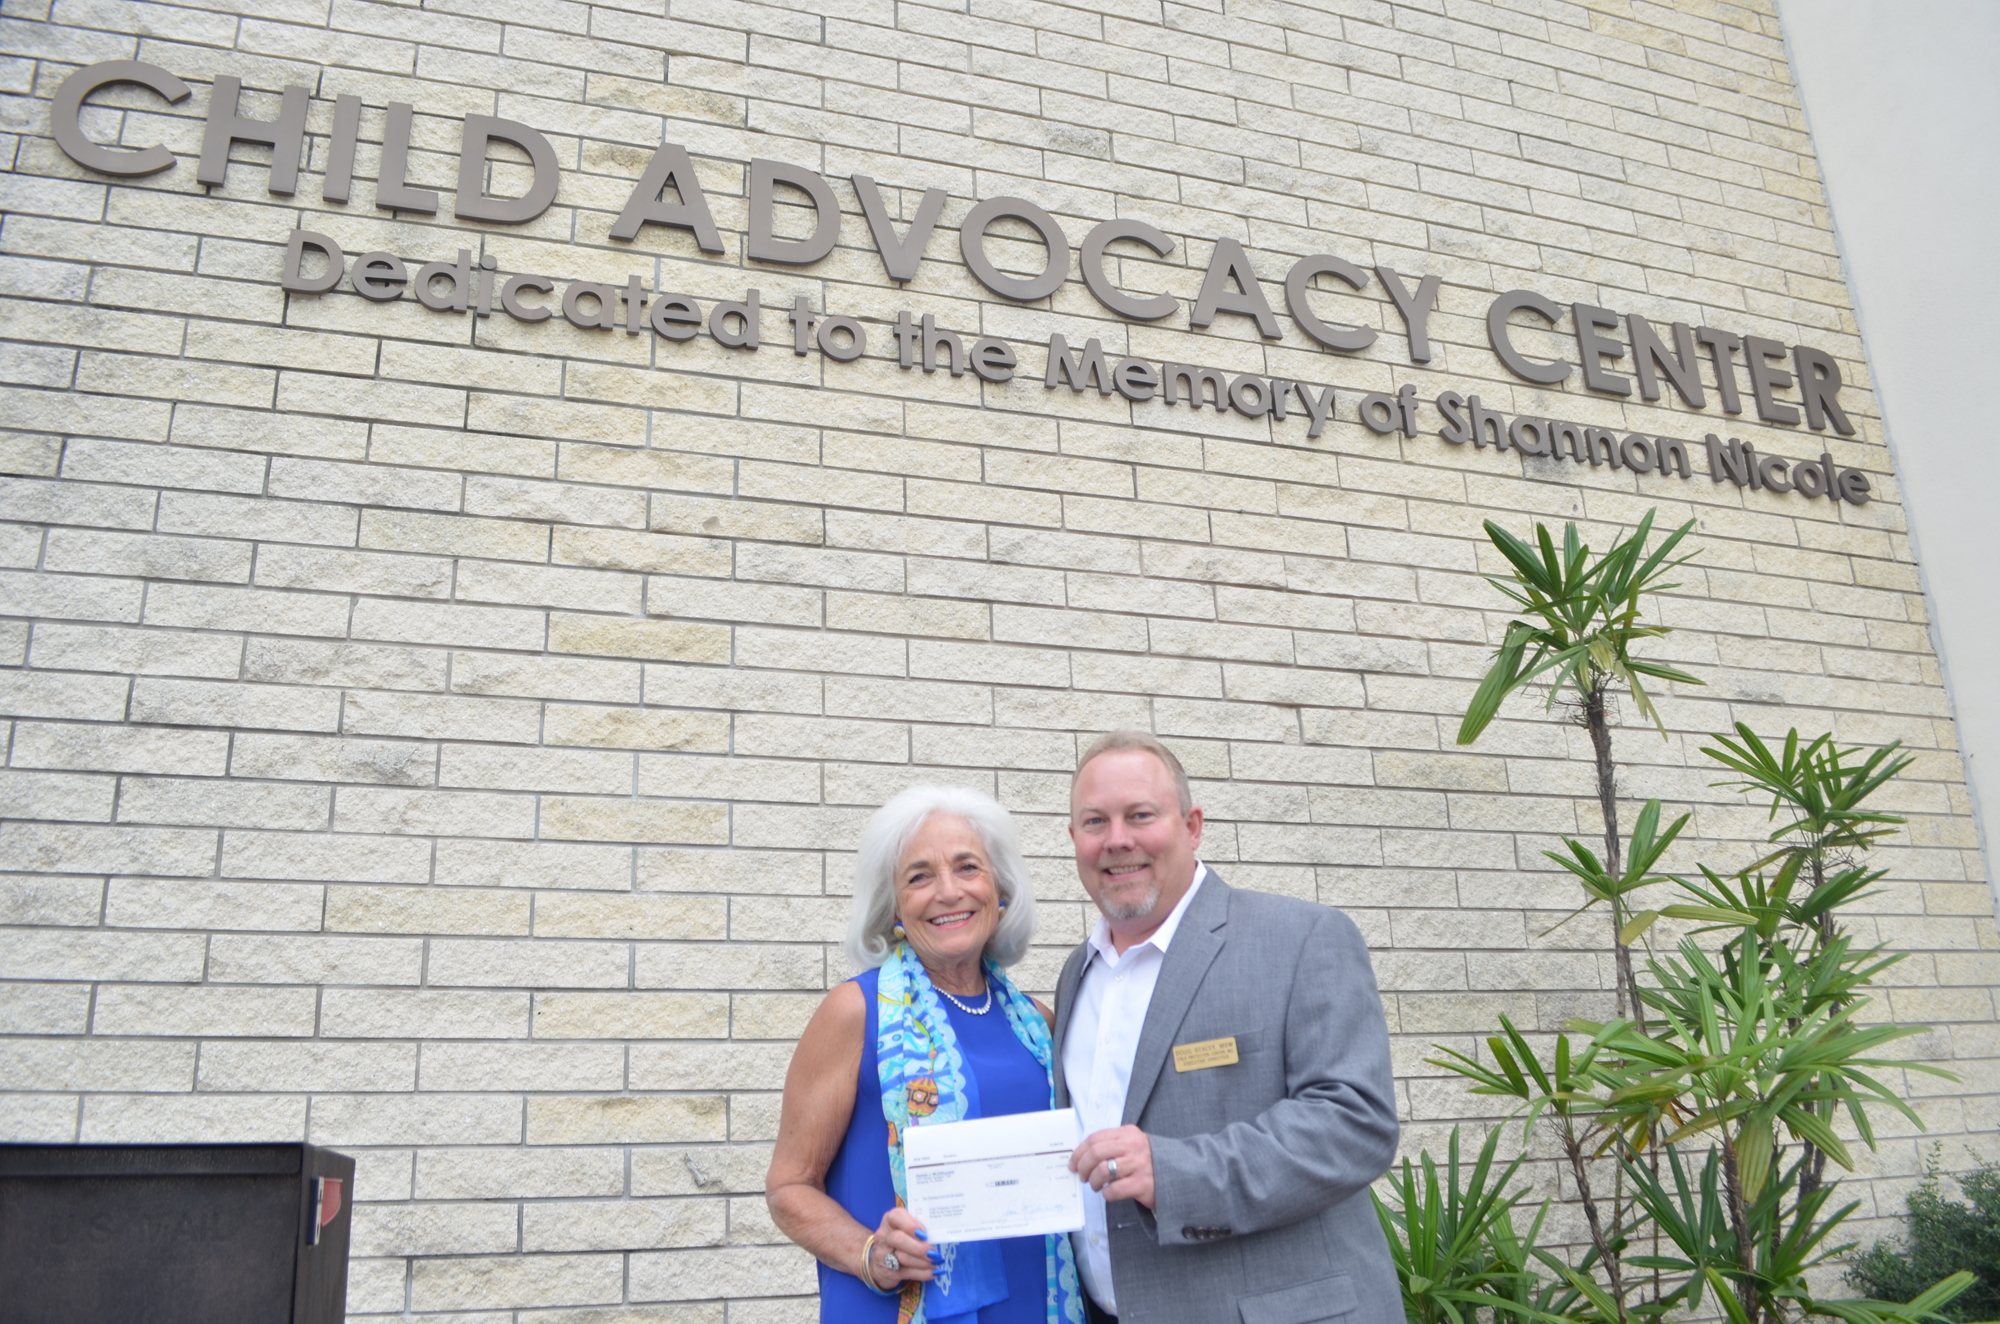 Graci McGillicuddy presents Douglas S. Staley, CEO of Child Protection Center, with her birthday donation check. Photo by Niki Kottmann.